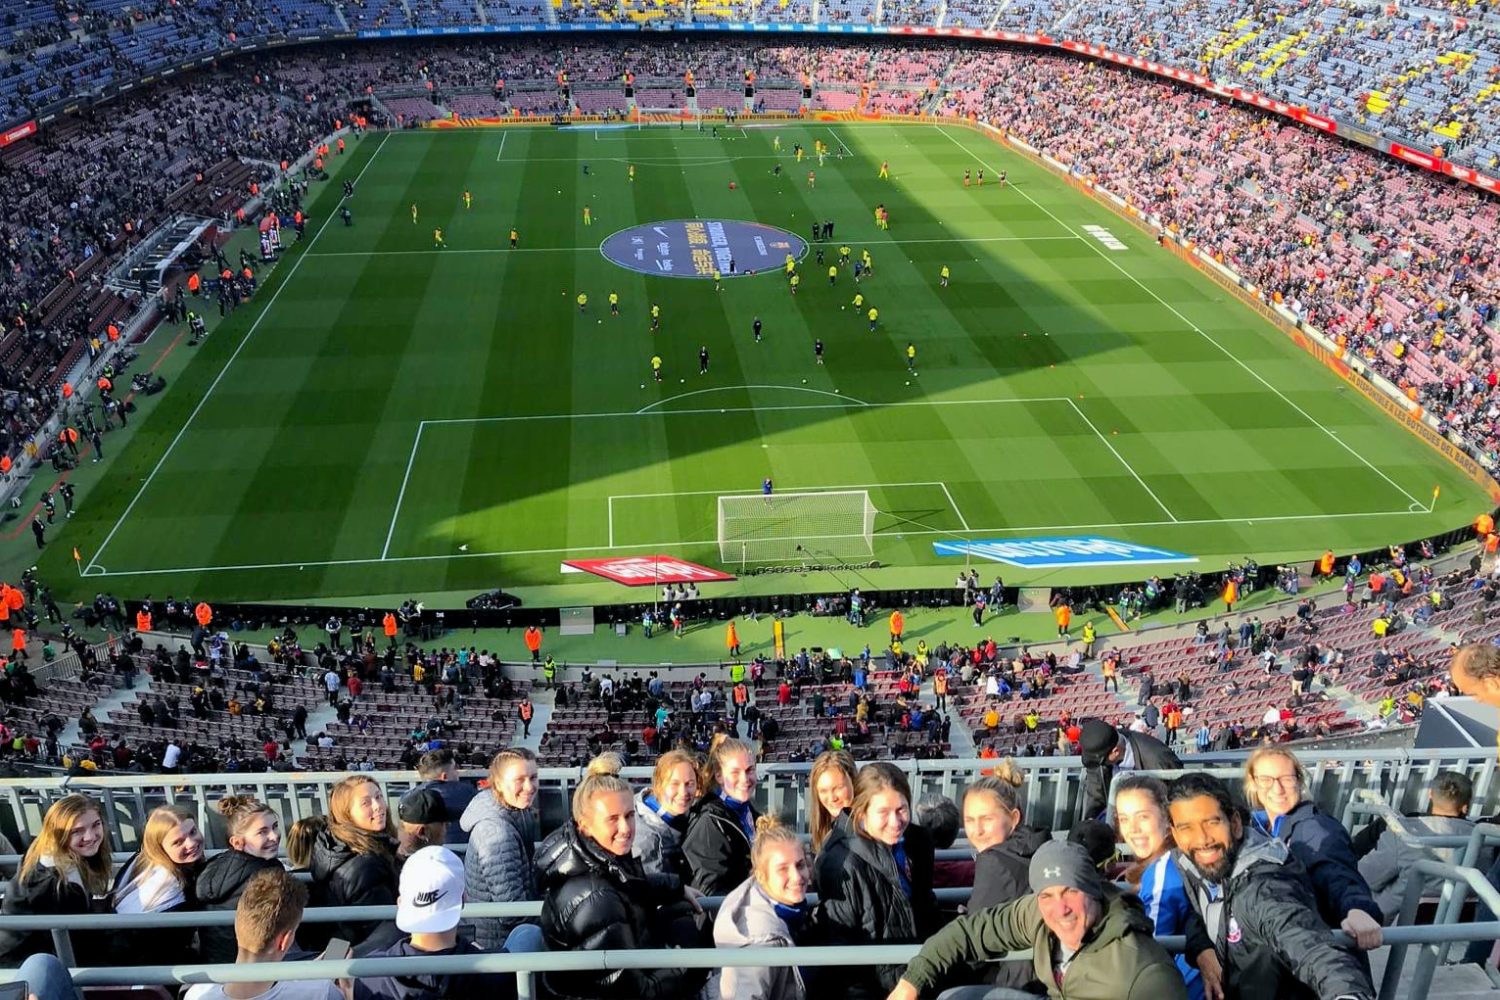 See FC Barcelona play at the Camp Nou stadium